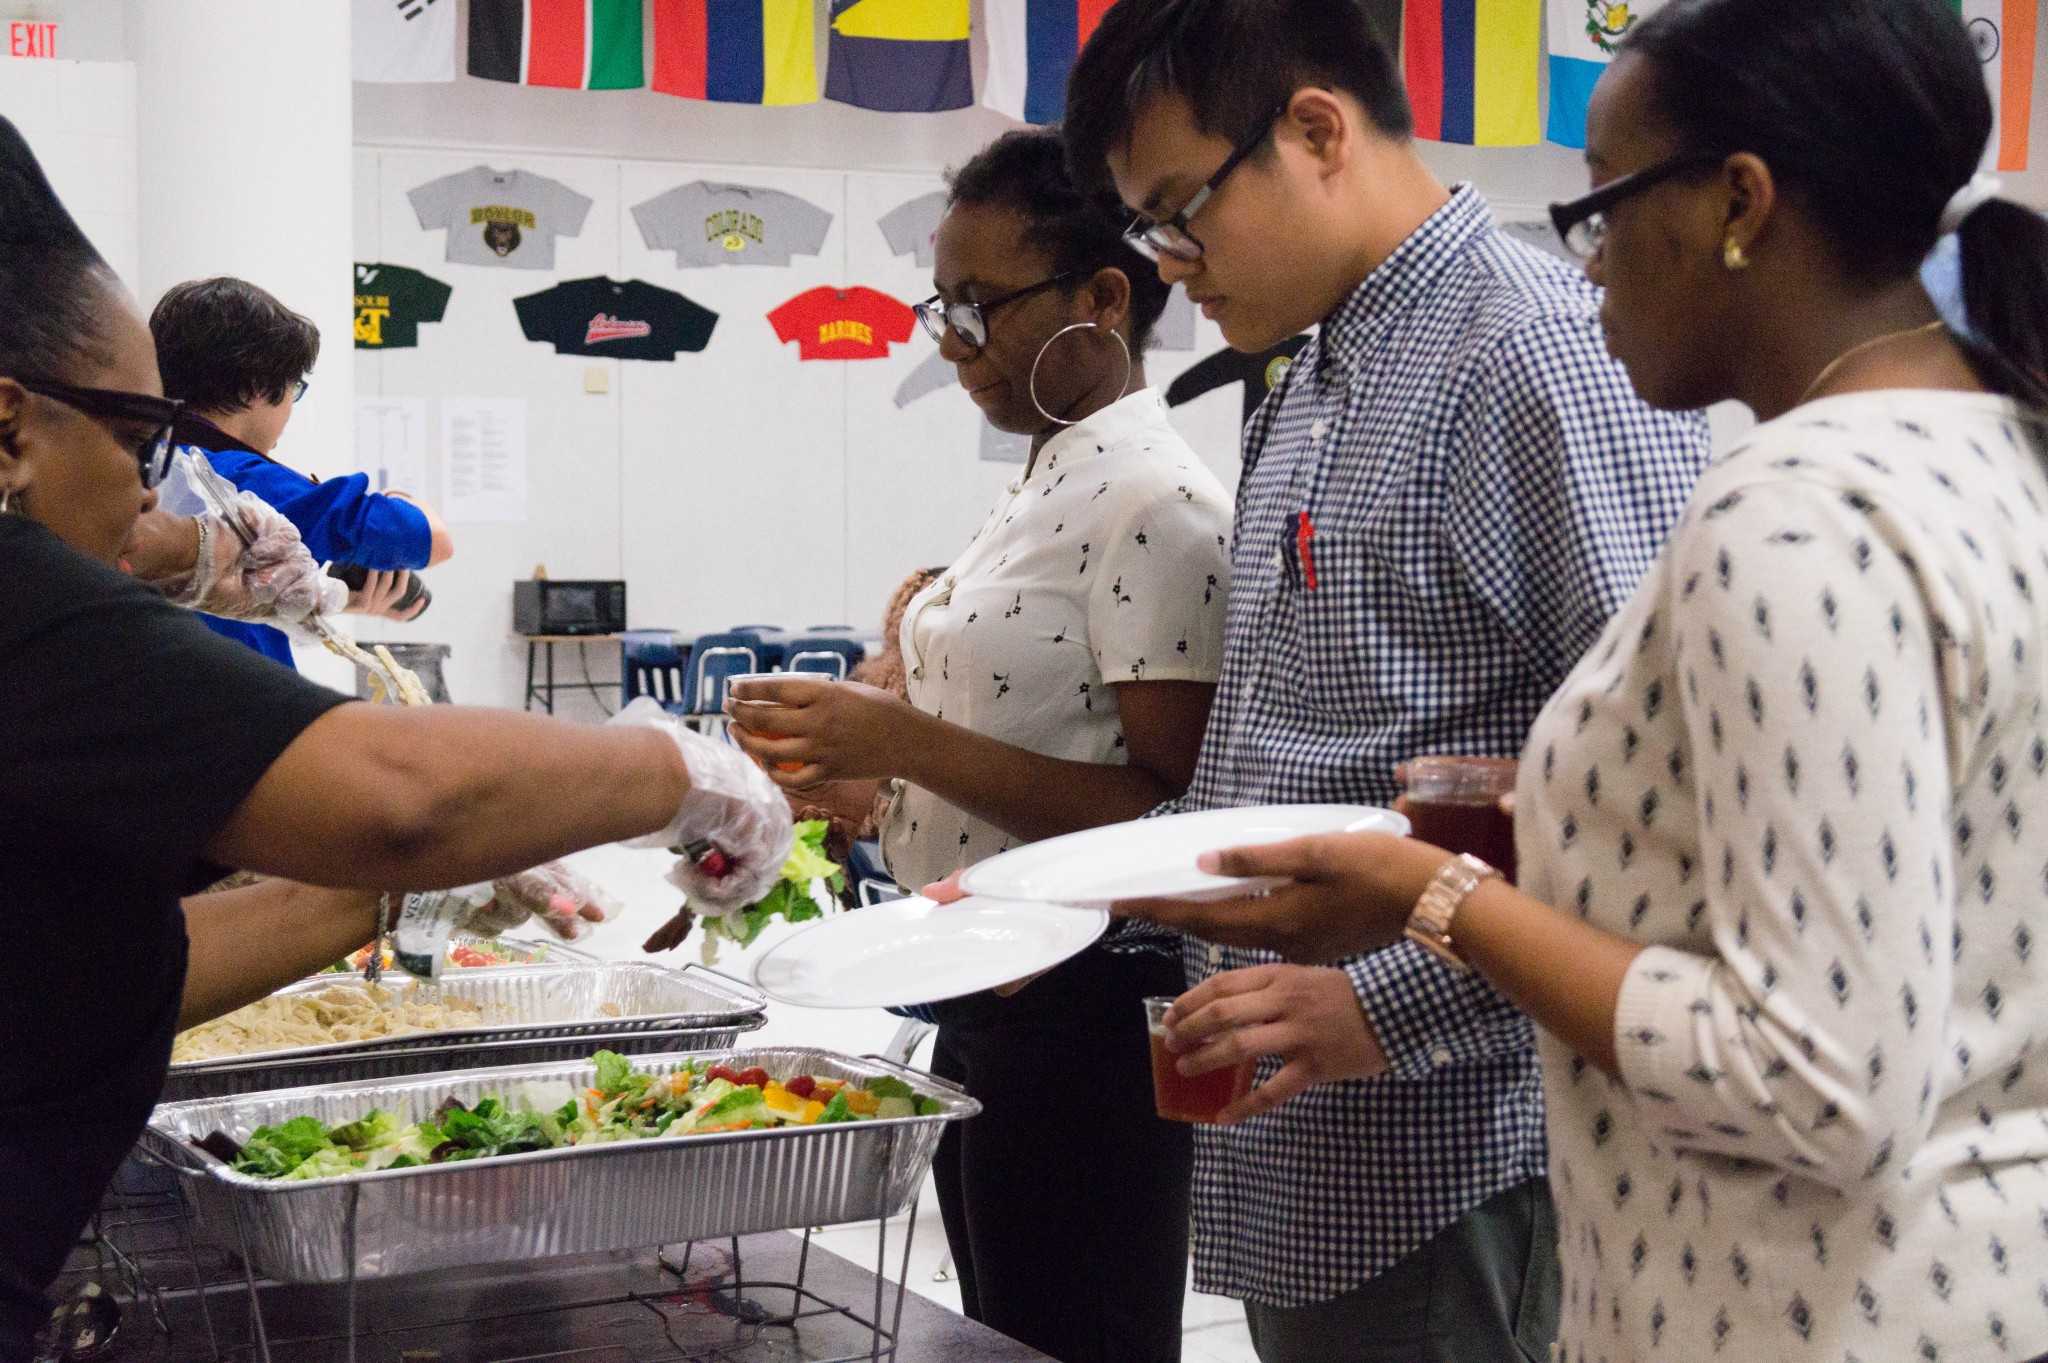 Duy Vo (12), Ashley Gwananji (12), and Vina Nweke (12) wait and anticipate on getting their delicious Alfredo and salad for the Eating Etiquette Workshop where they learn how they should eat in professional dinner settings.